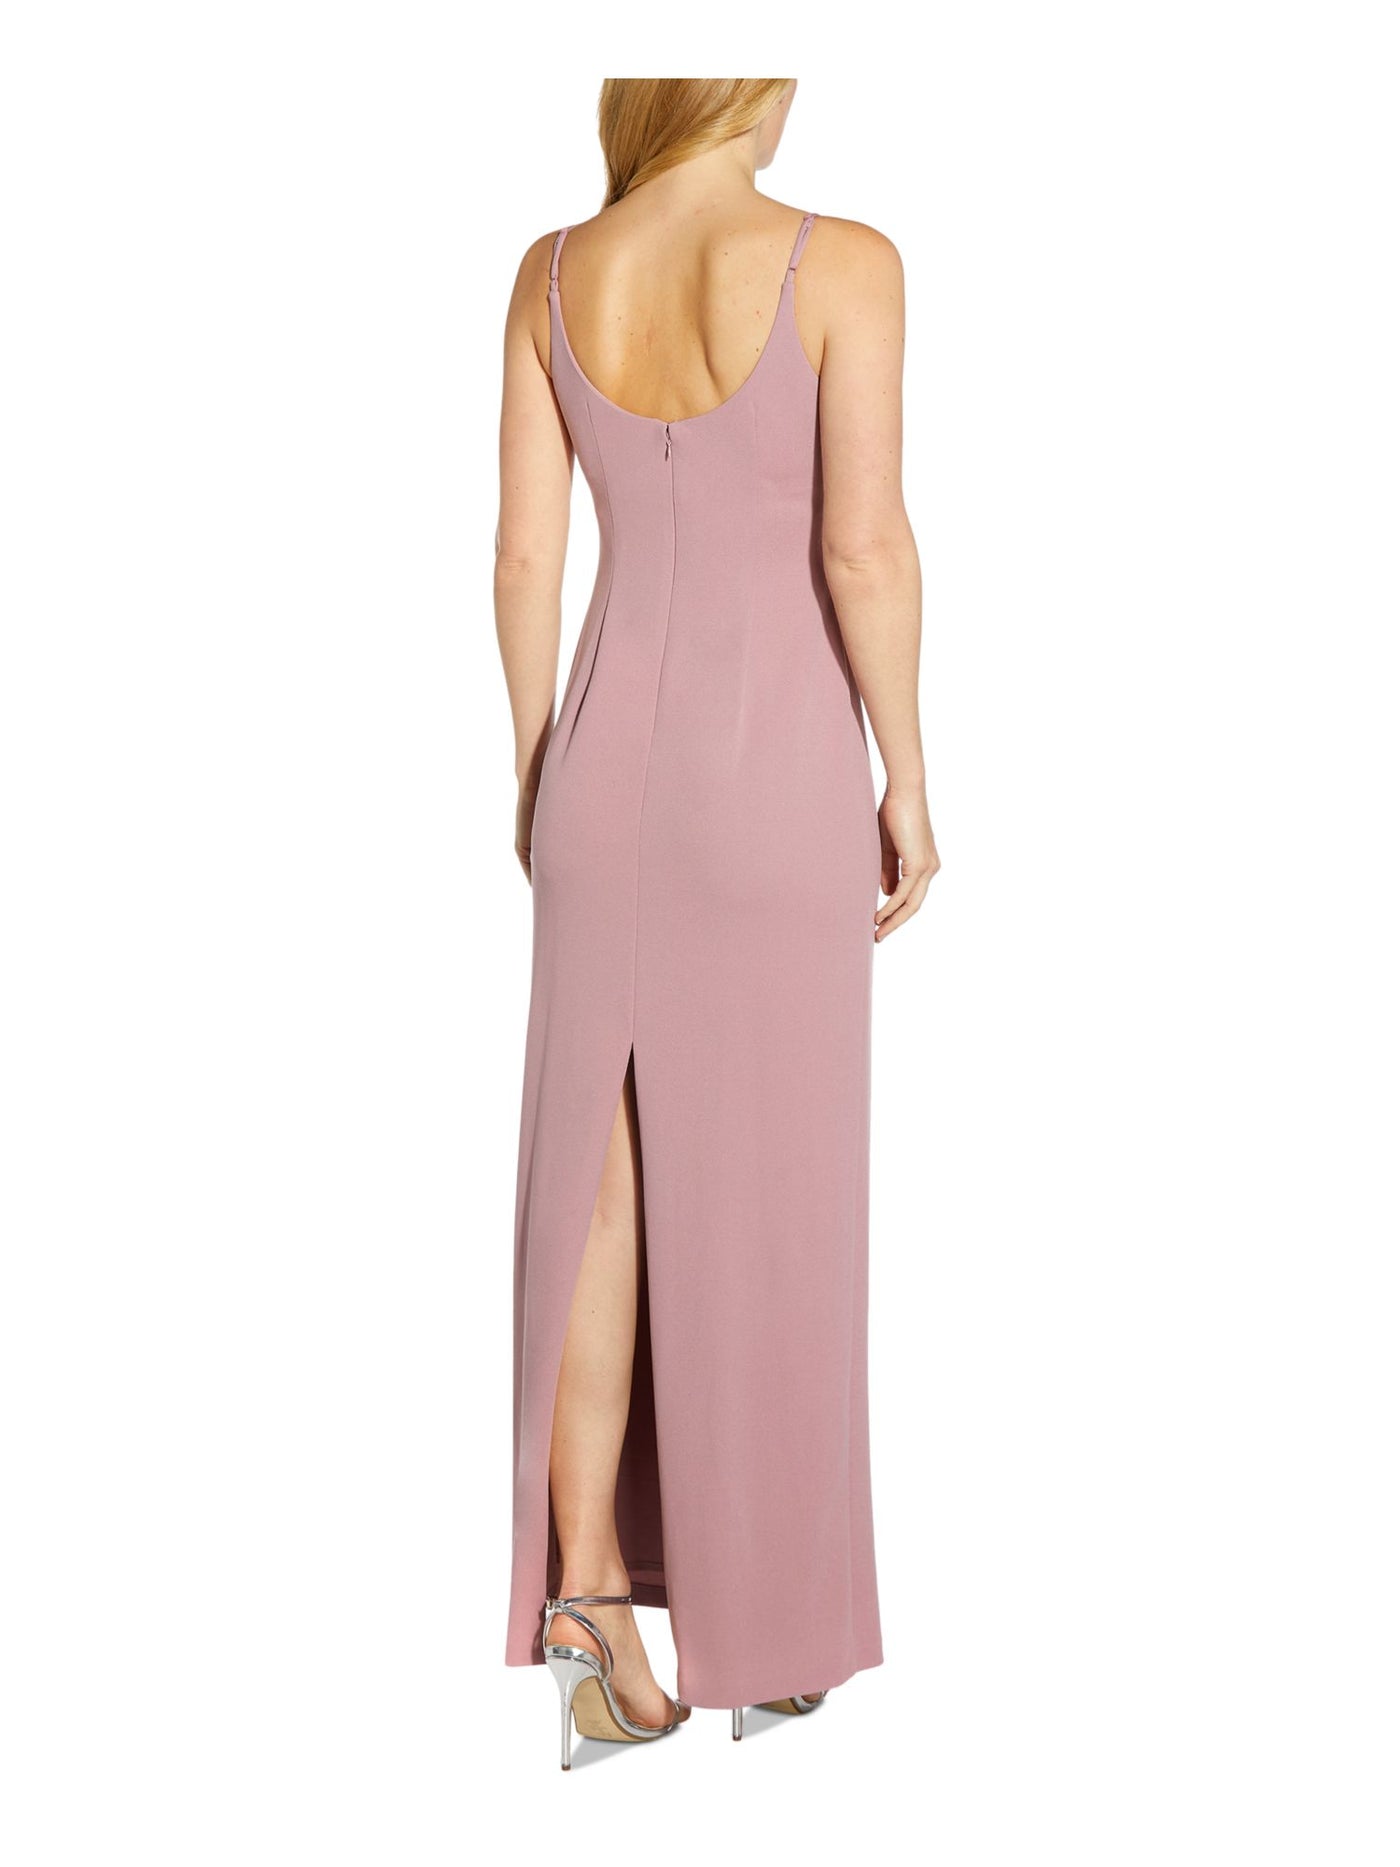 ADRIANNA PAPELL Womens Pink Stretch Ruched Zippered Column Silhouette Back Slit Spaghetti Strap V Neck Full-Length Evening Dress 8